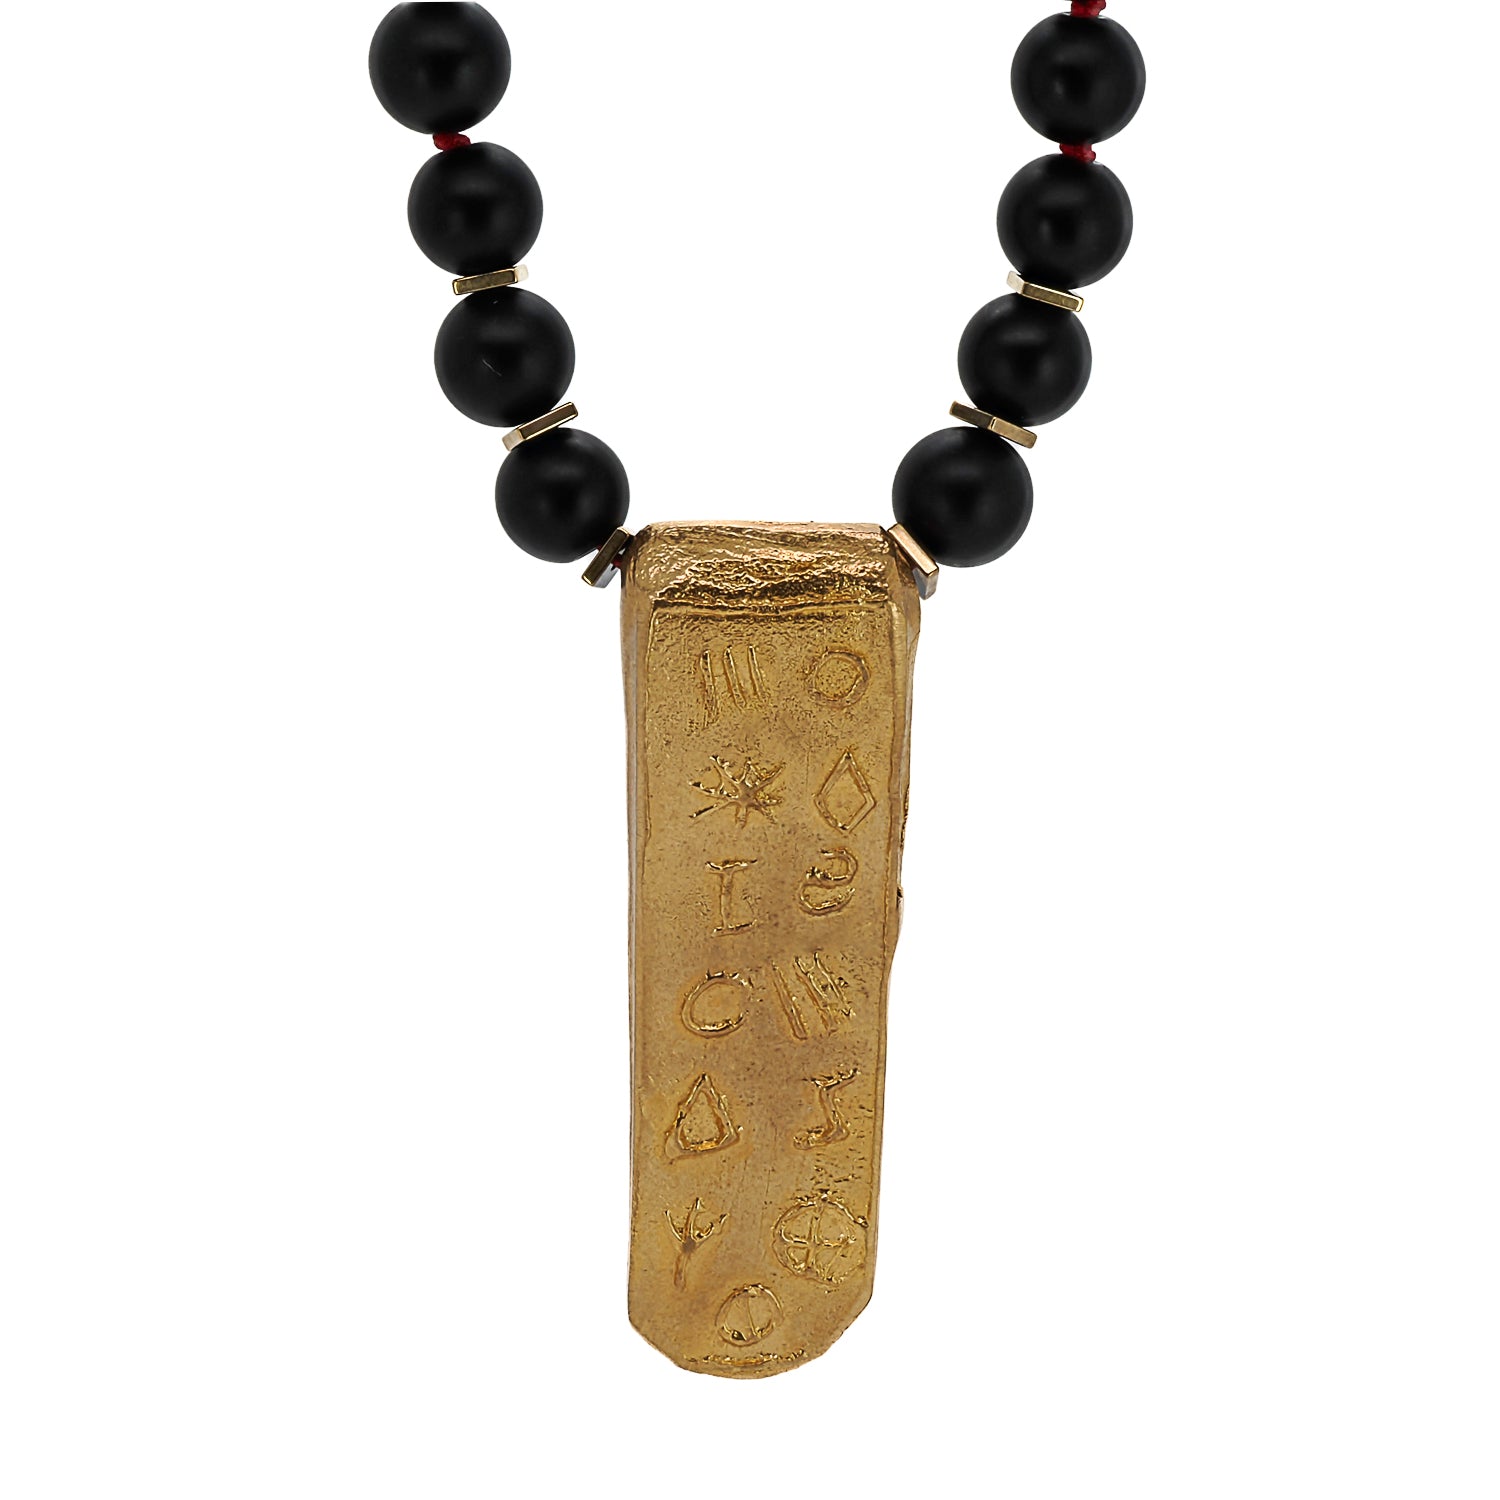 Versatile Opulence: Rich 24K Gold Plated Beads and Intricate Bronze Accents